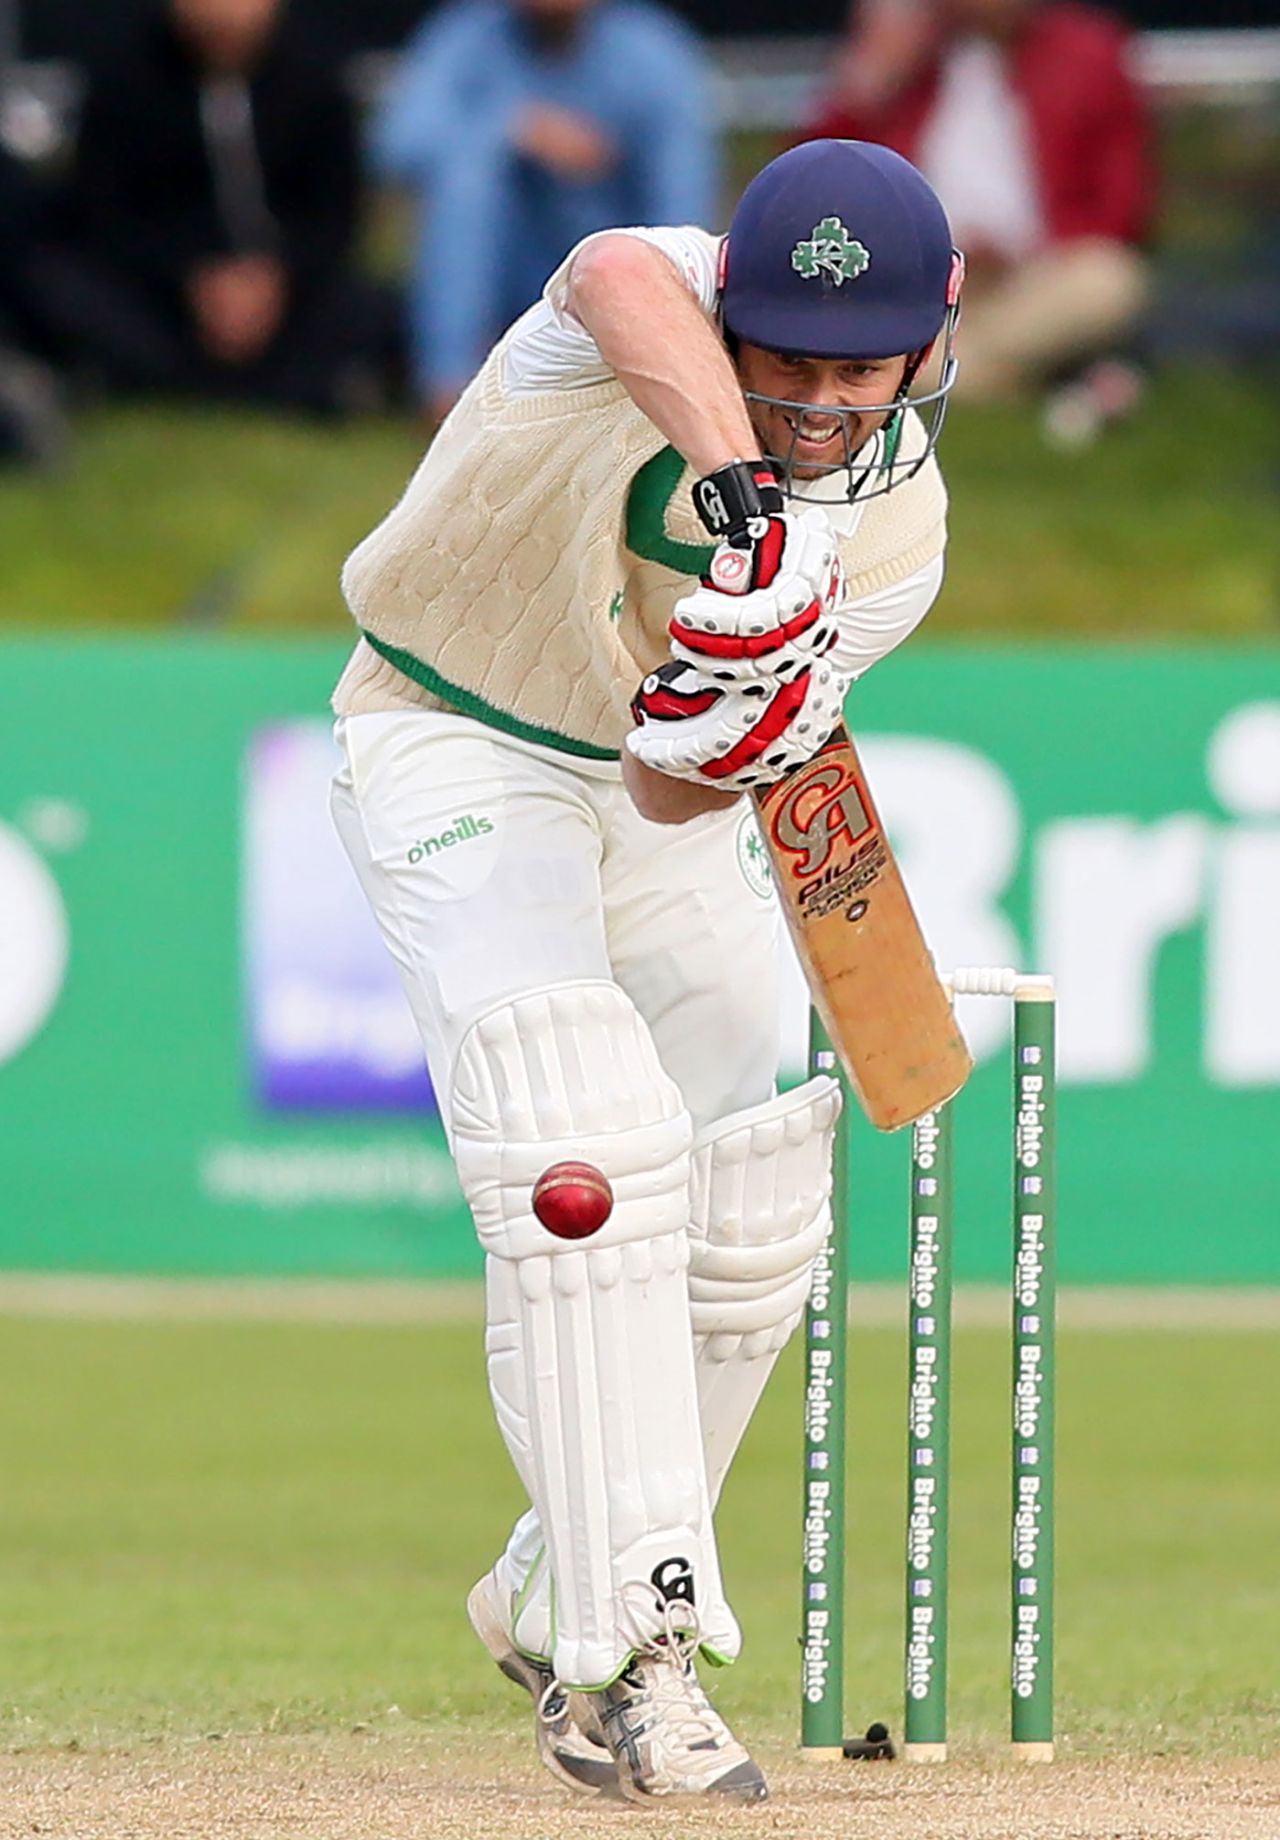 Ed Joyce helped Ireland make a solid start to their second innings, Ireland v Pakistan, Only Test, Malahide, 3rd day, May 13, 2018